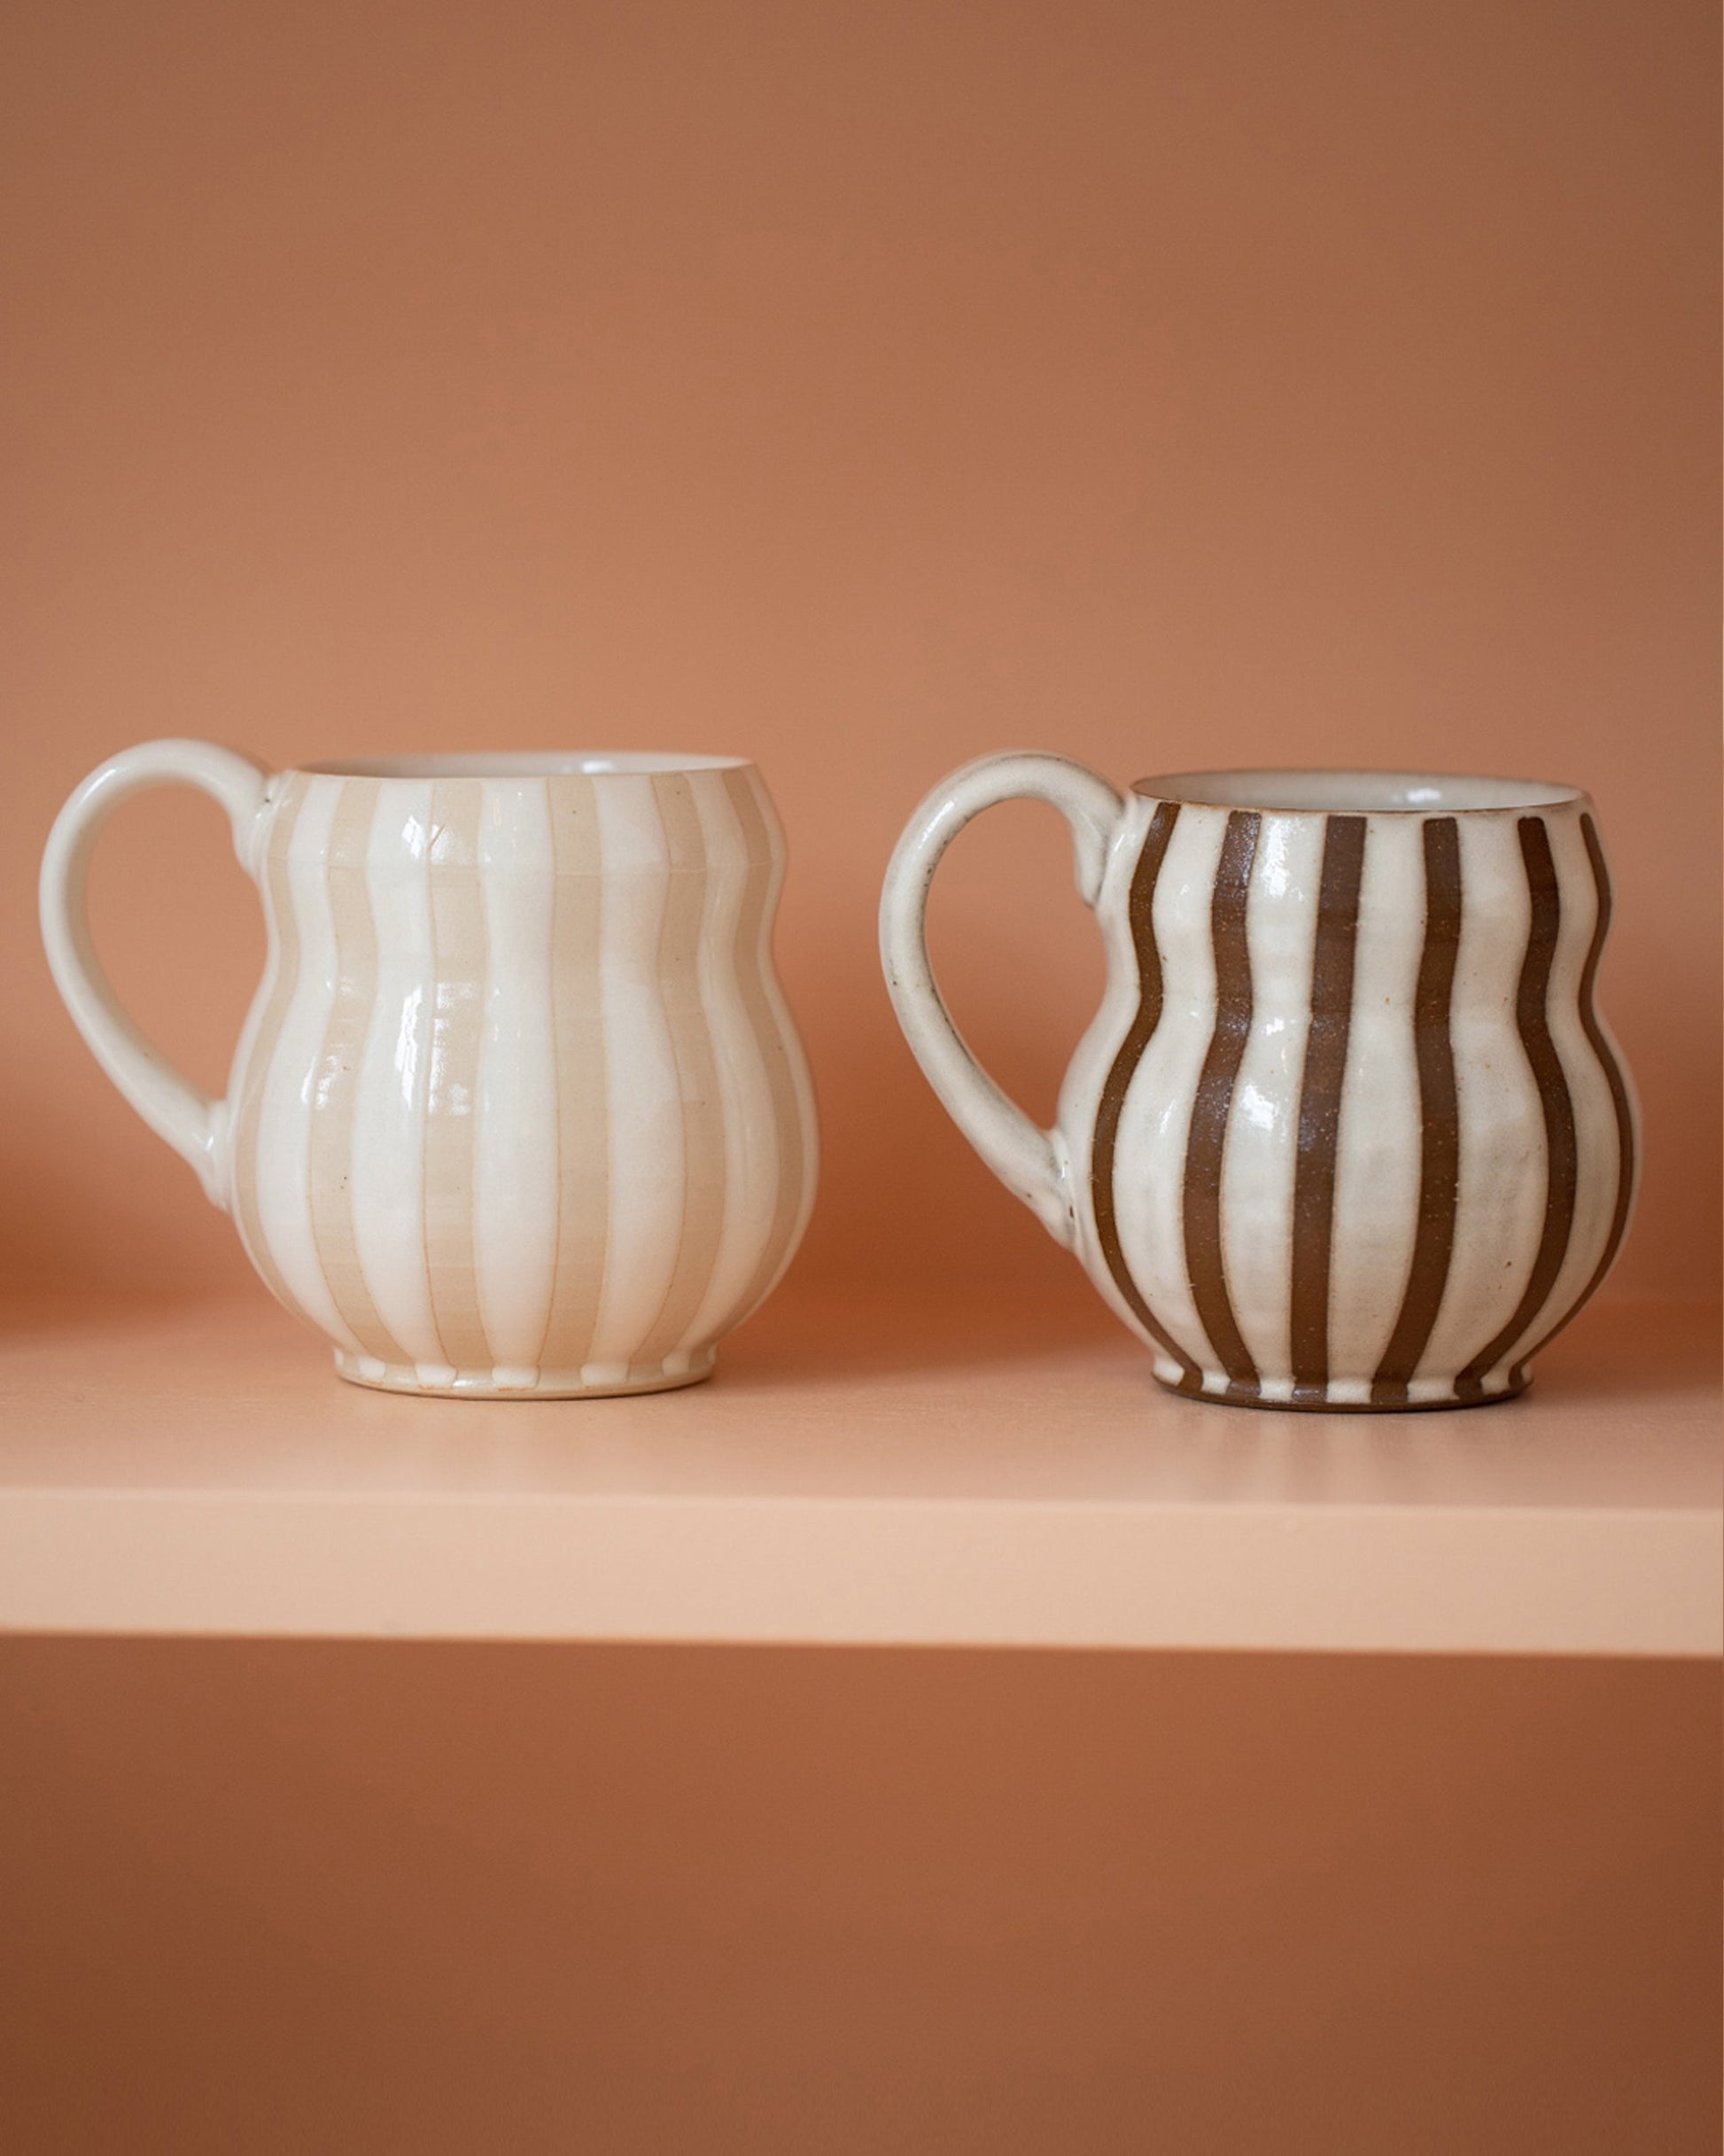 Styled image featuring Jeremy Ayers White and Brown Bubble Mugs.